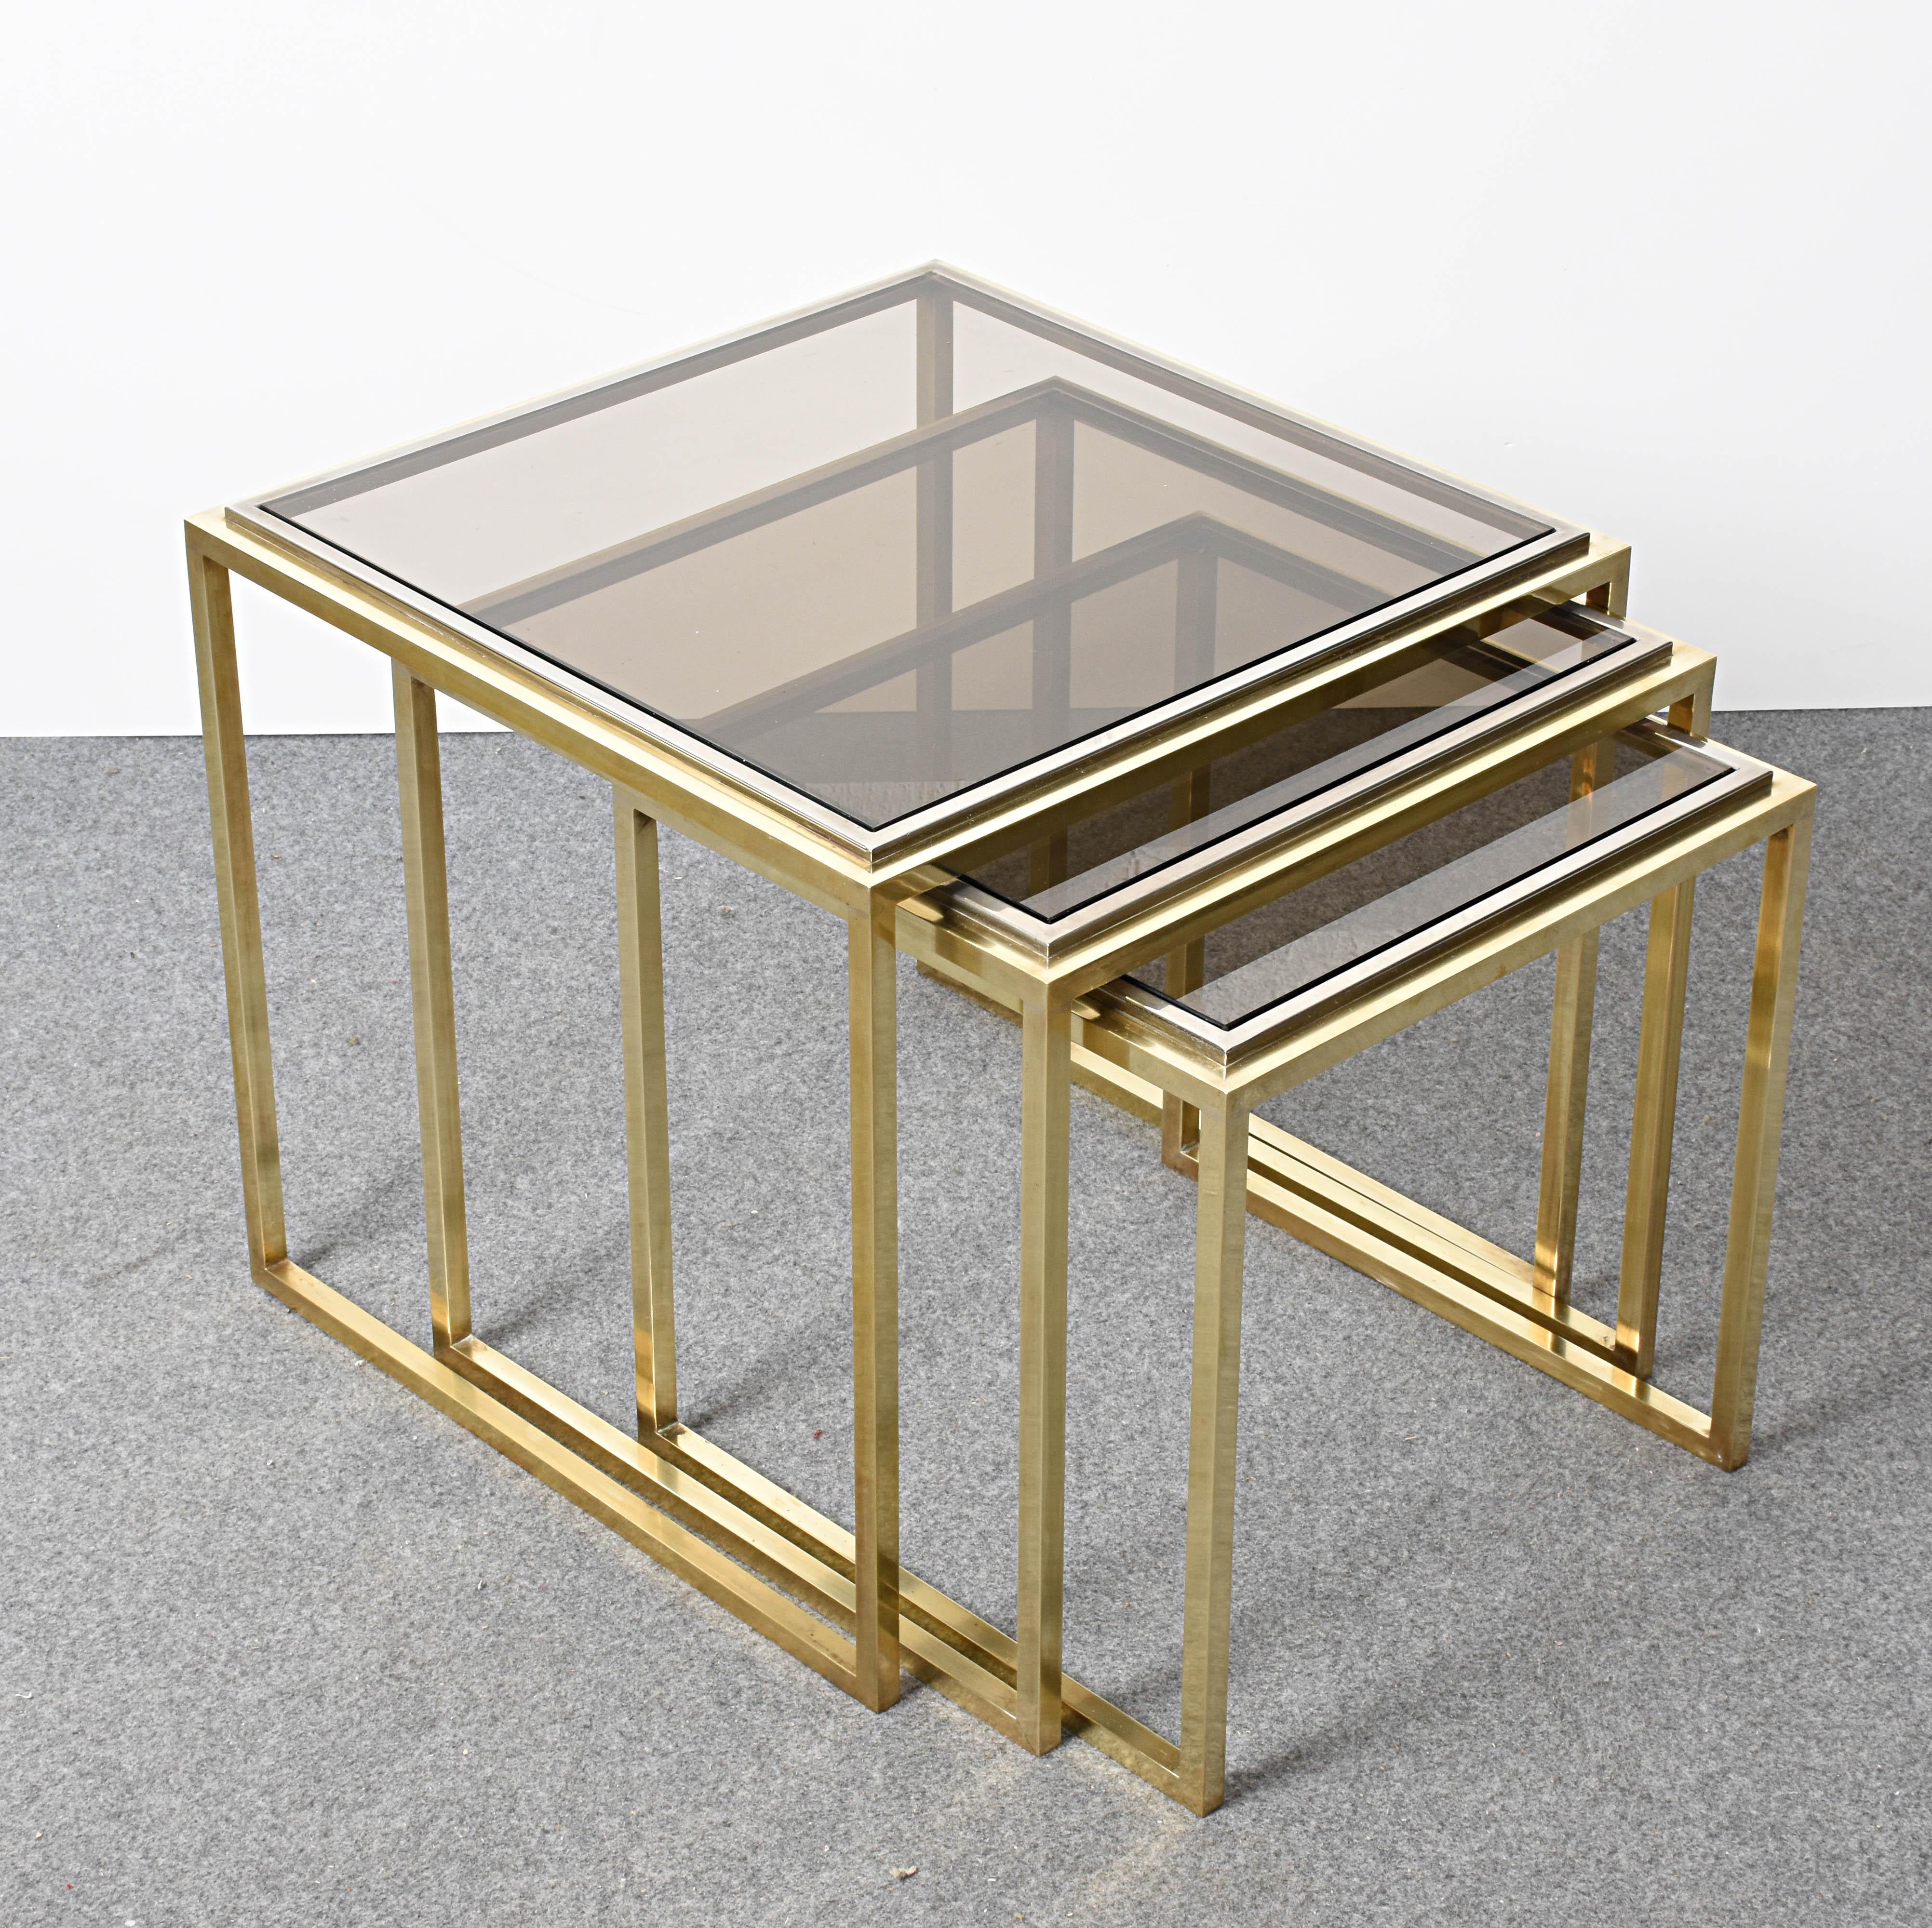 20th Century Mid-Century Modern Chrome and Brass Smoked Glass Italian Nesting Tables, 1970s For Sale